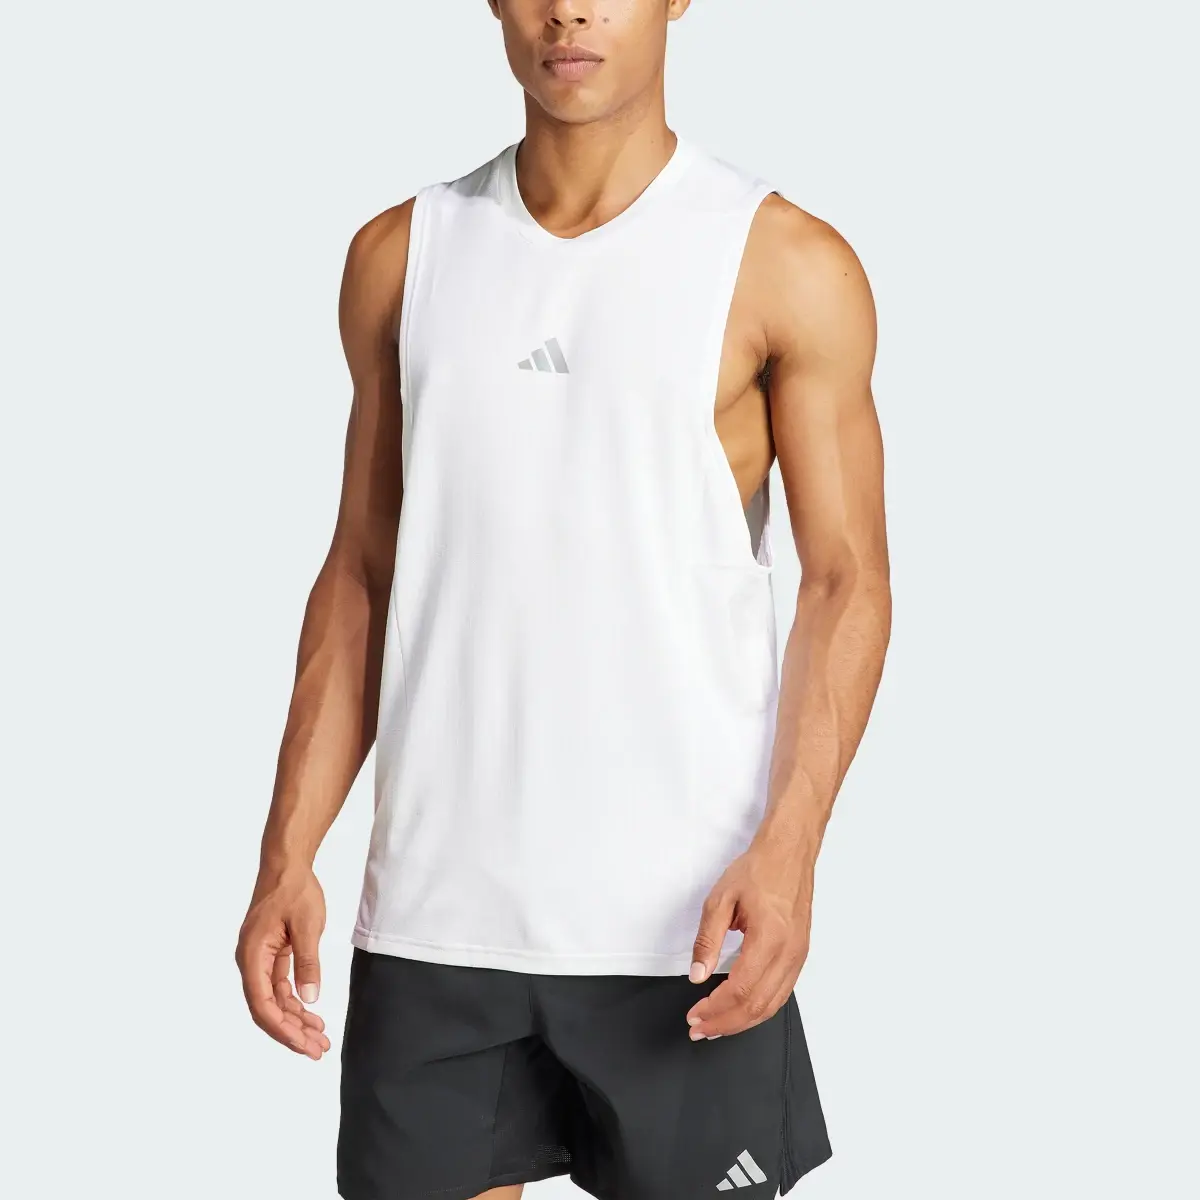 Adidas Designed for Training Workout HEAT.RDY Tank Top. 1